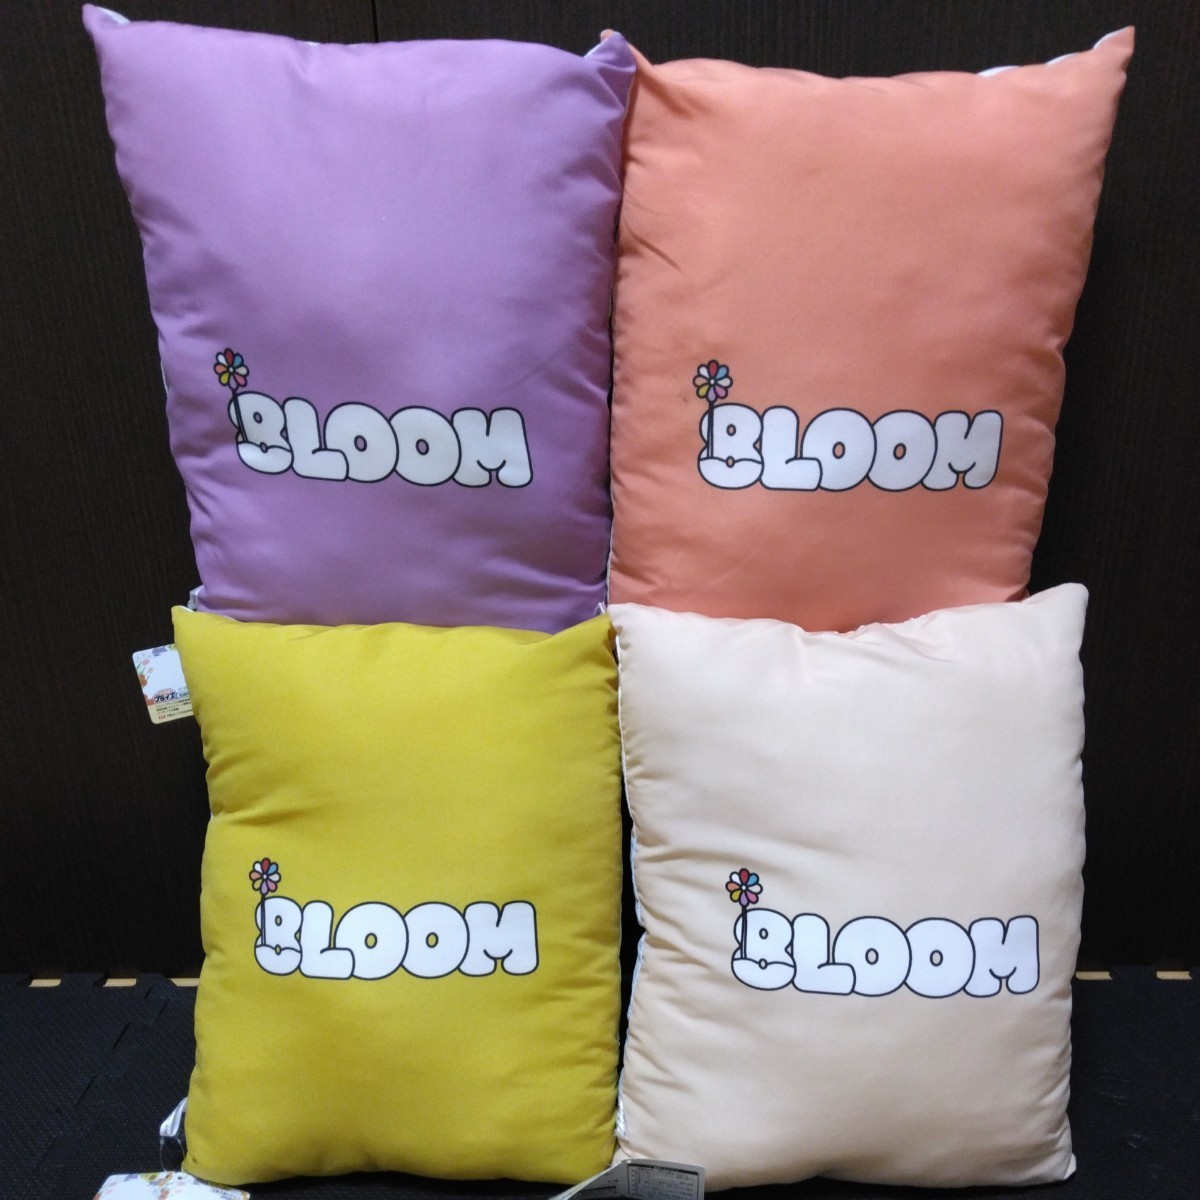 .. flower become 8LOOM photo cushion new goods unused tag attaching set sale 